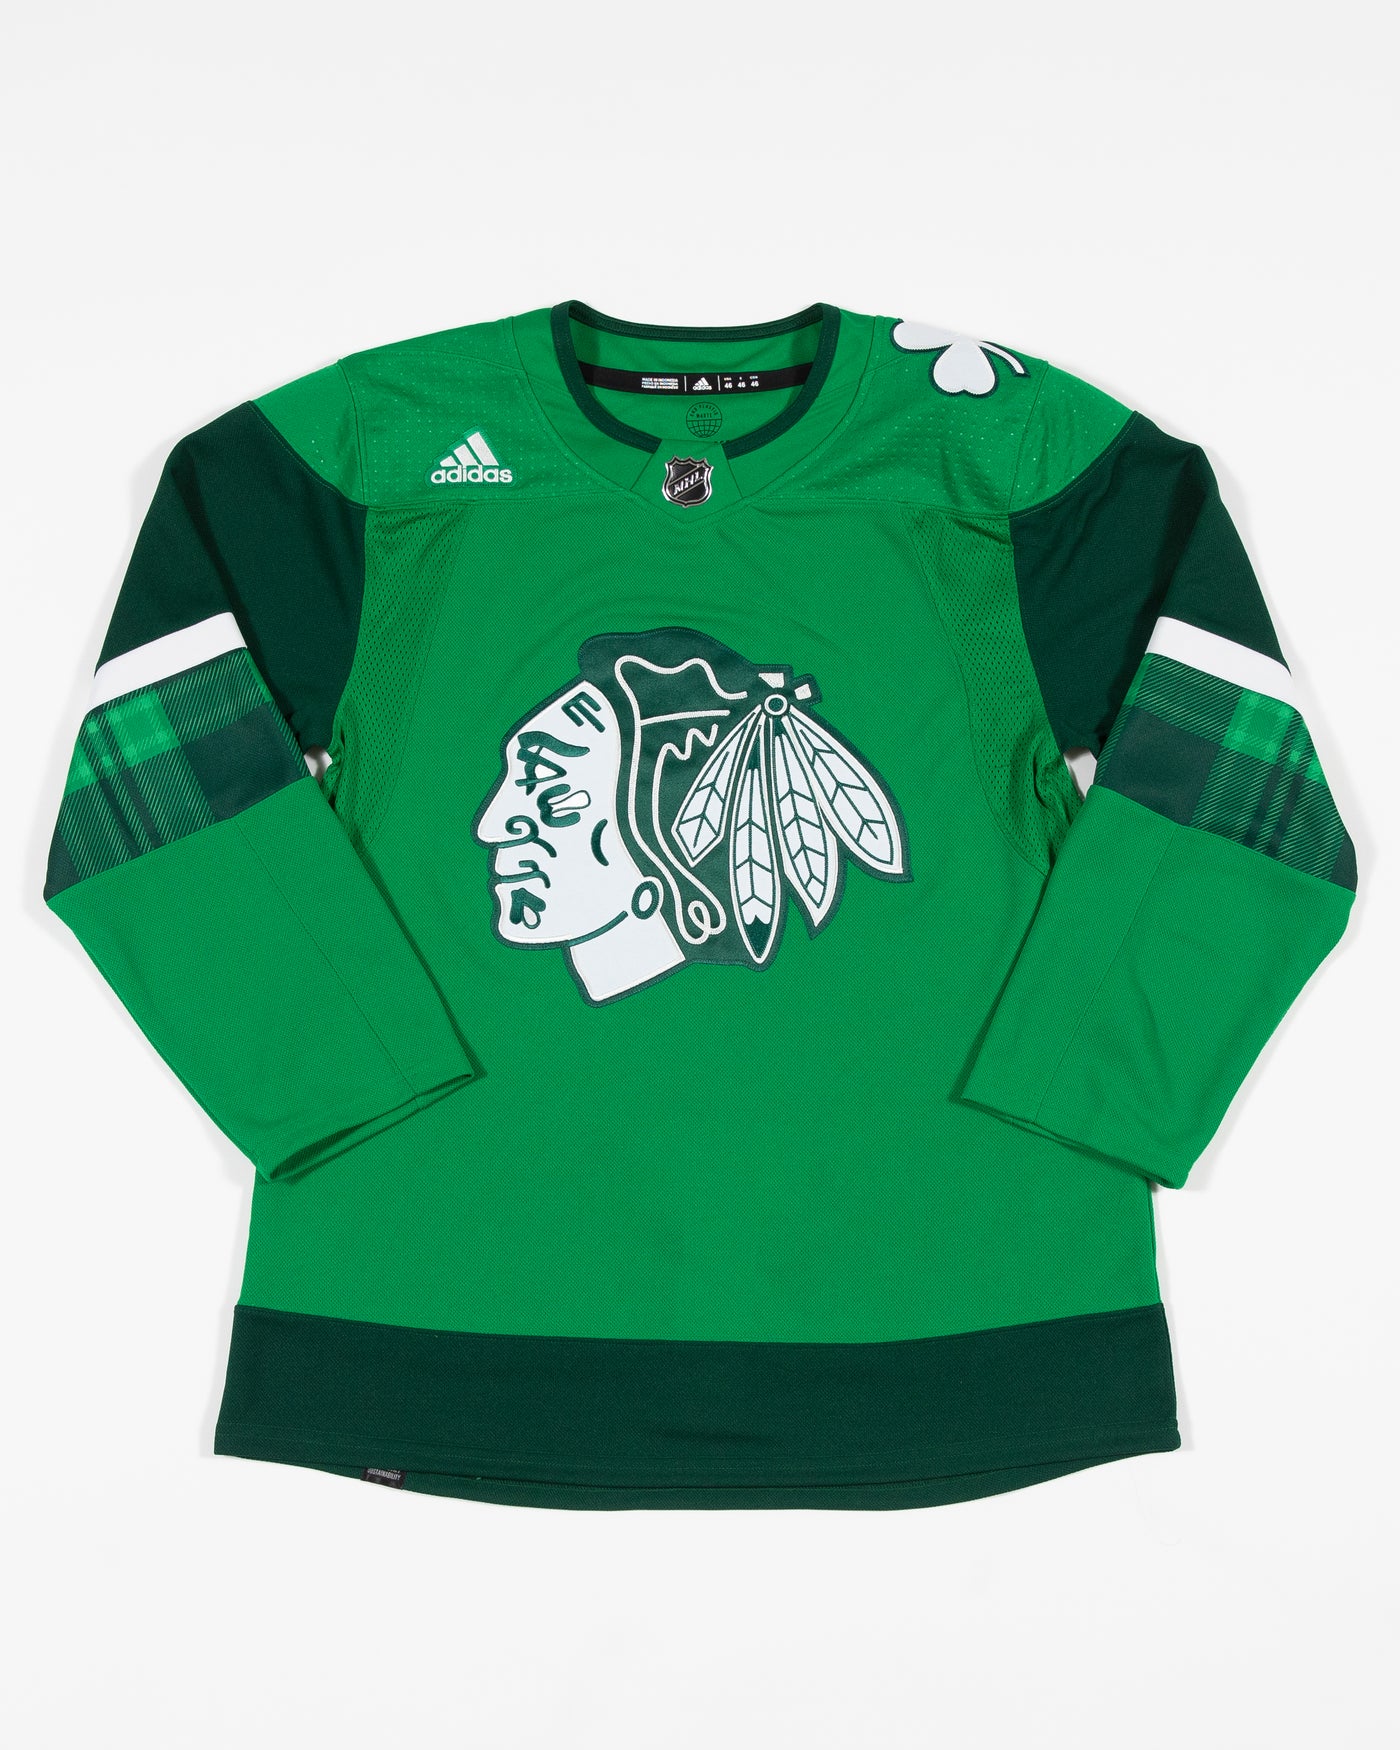 adidas green Chicago Blackhawks St. Patrick's Day jersey - front lay flat